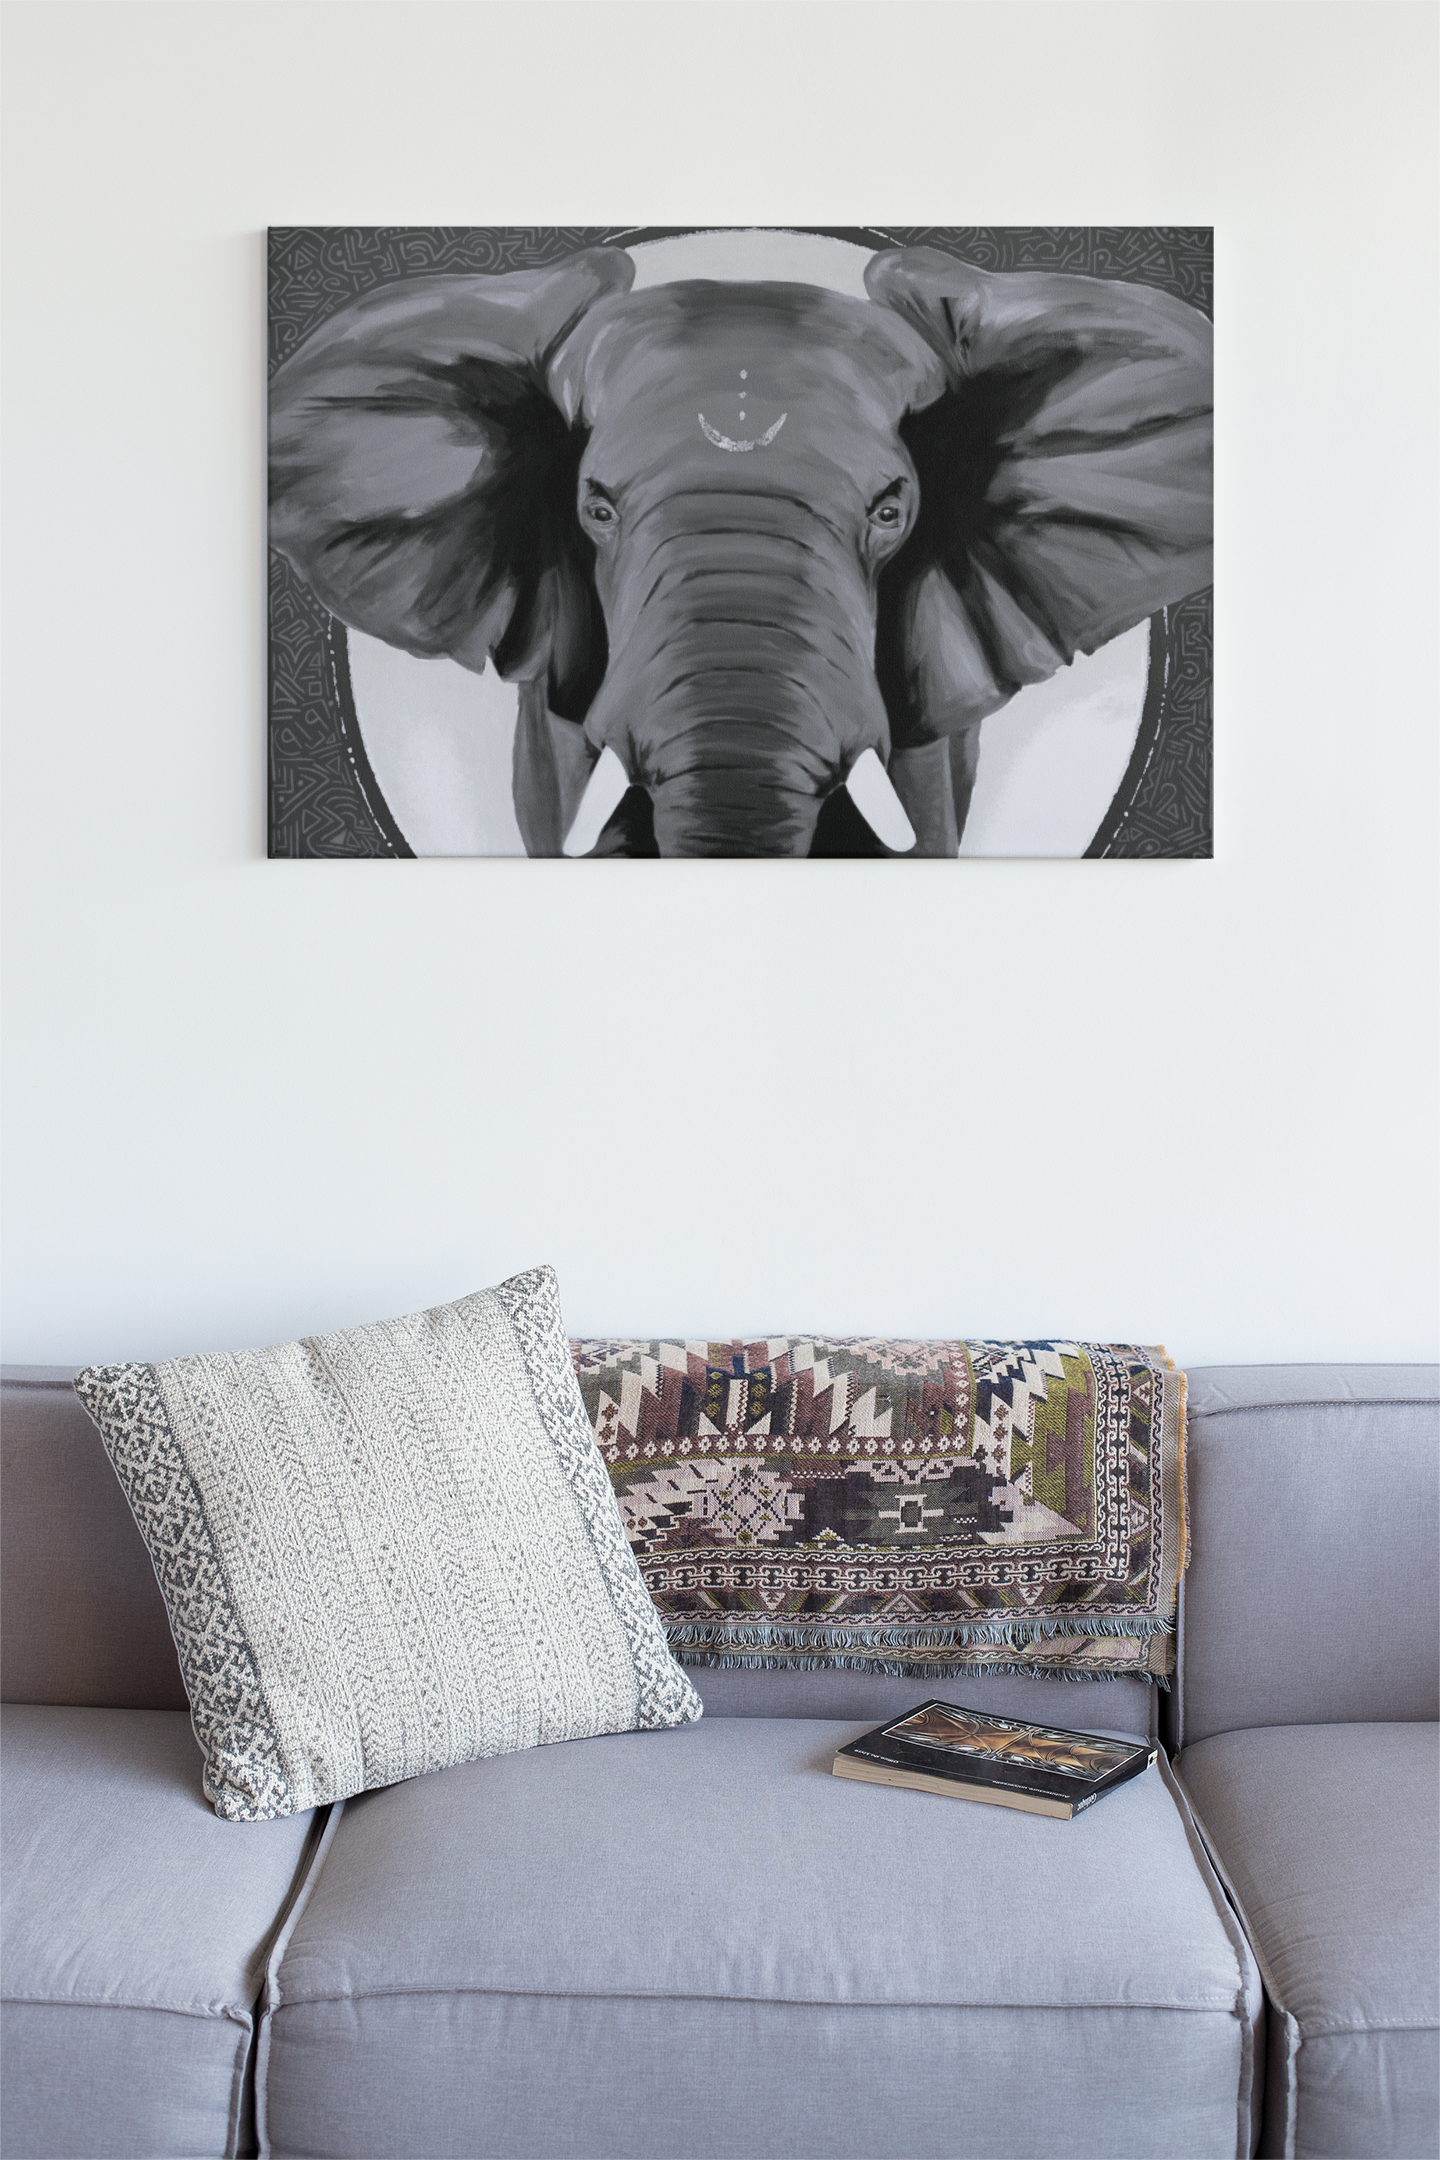 Black and white art of an African elephant art print hanging on the wall over a grey couch